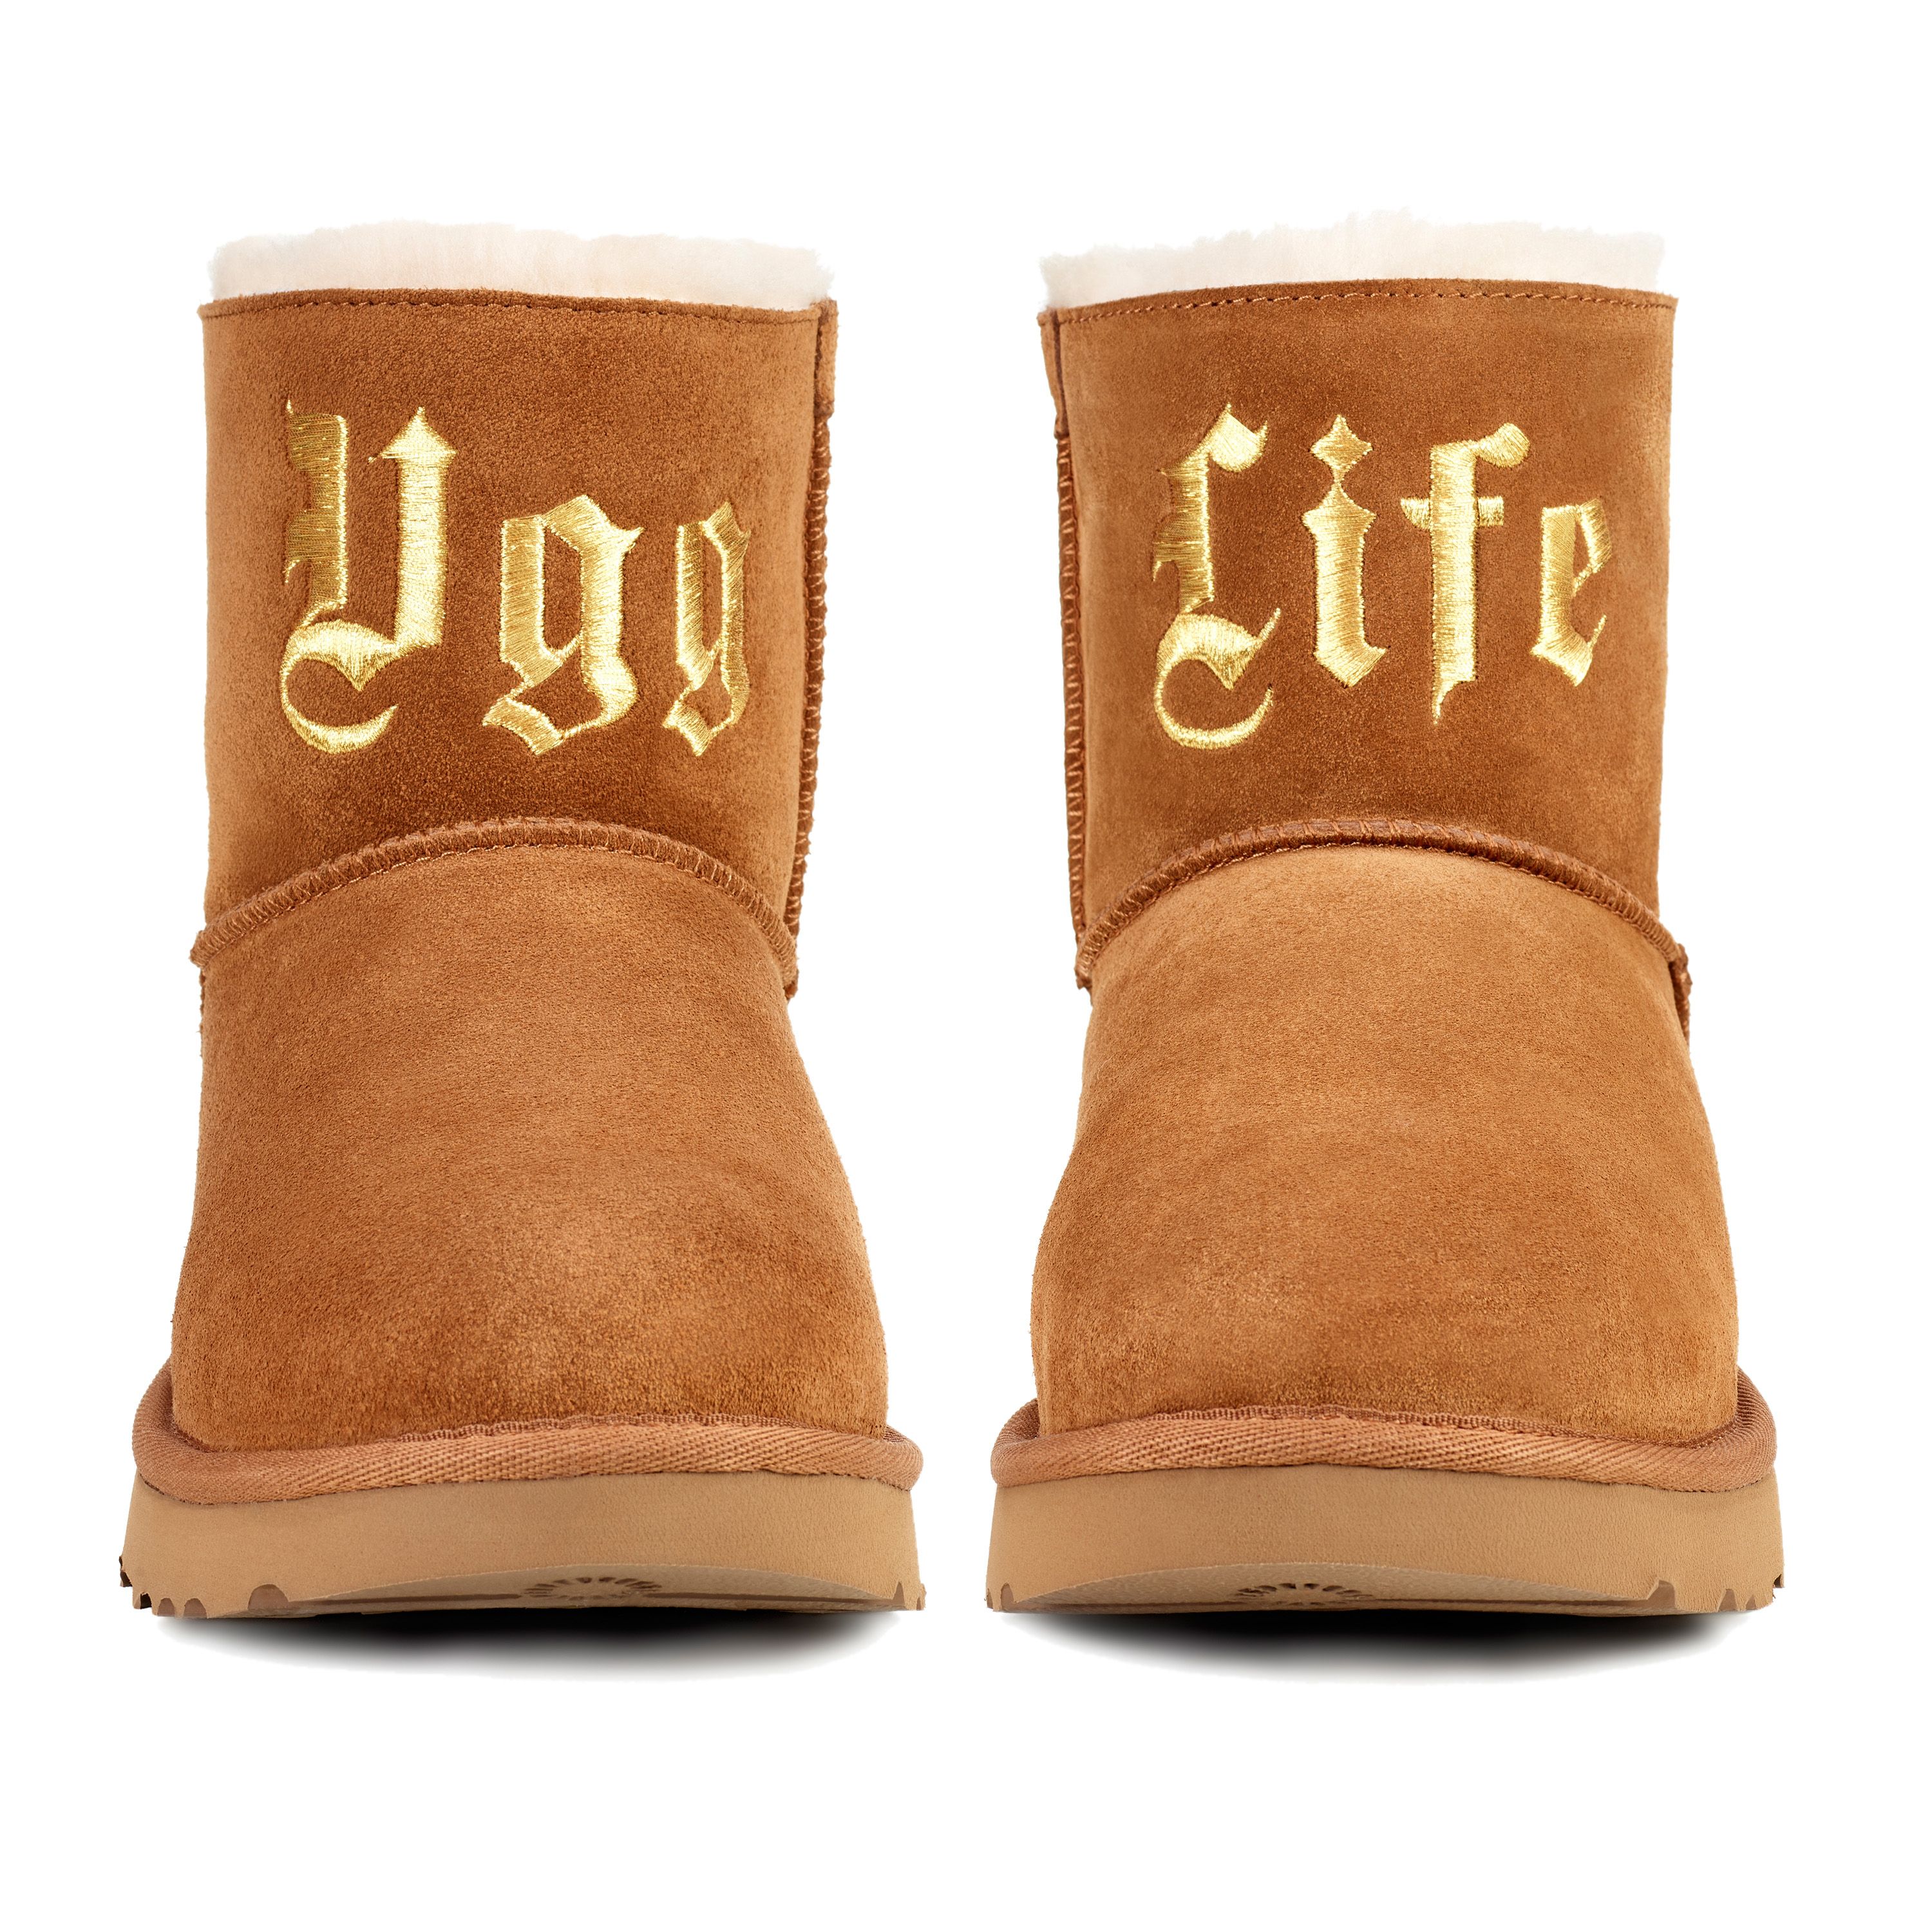 embroidered uggs